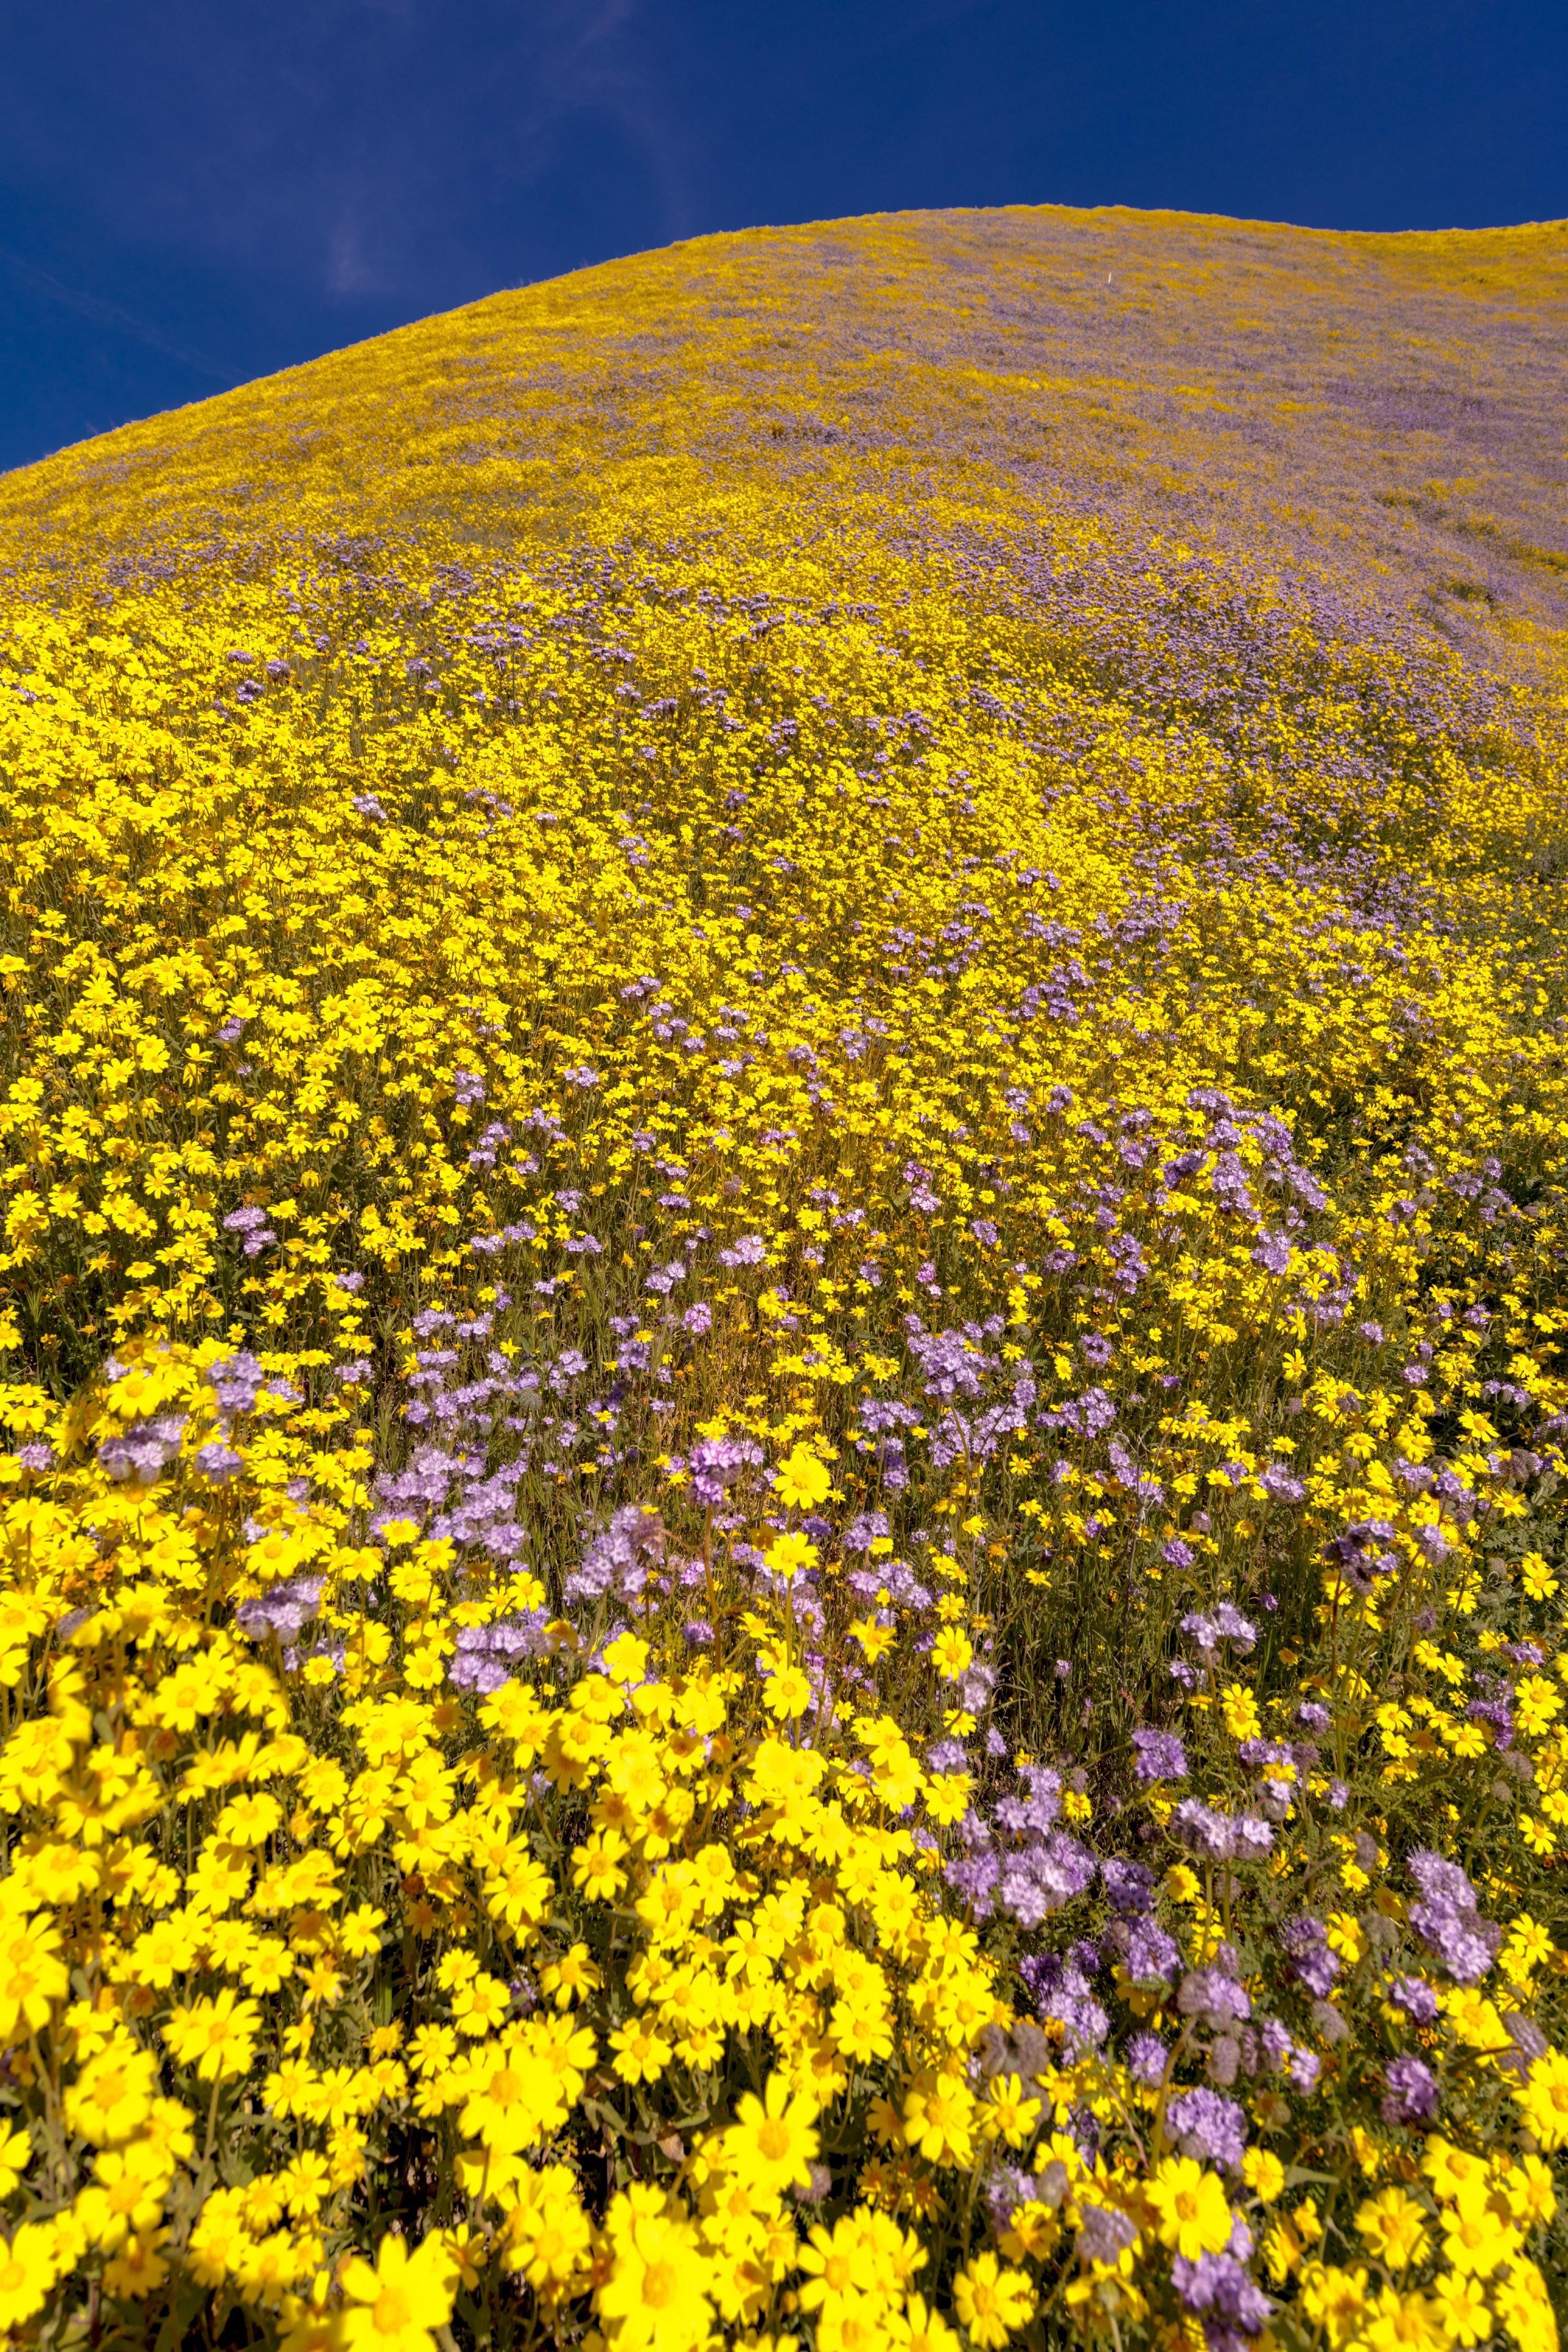 Carrizo Plain&#x27;s vast rolling hill completely filled with yellow and purple flowers